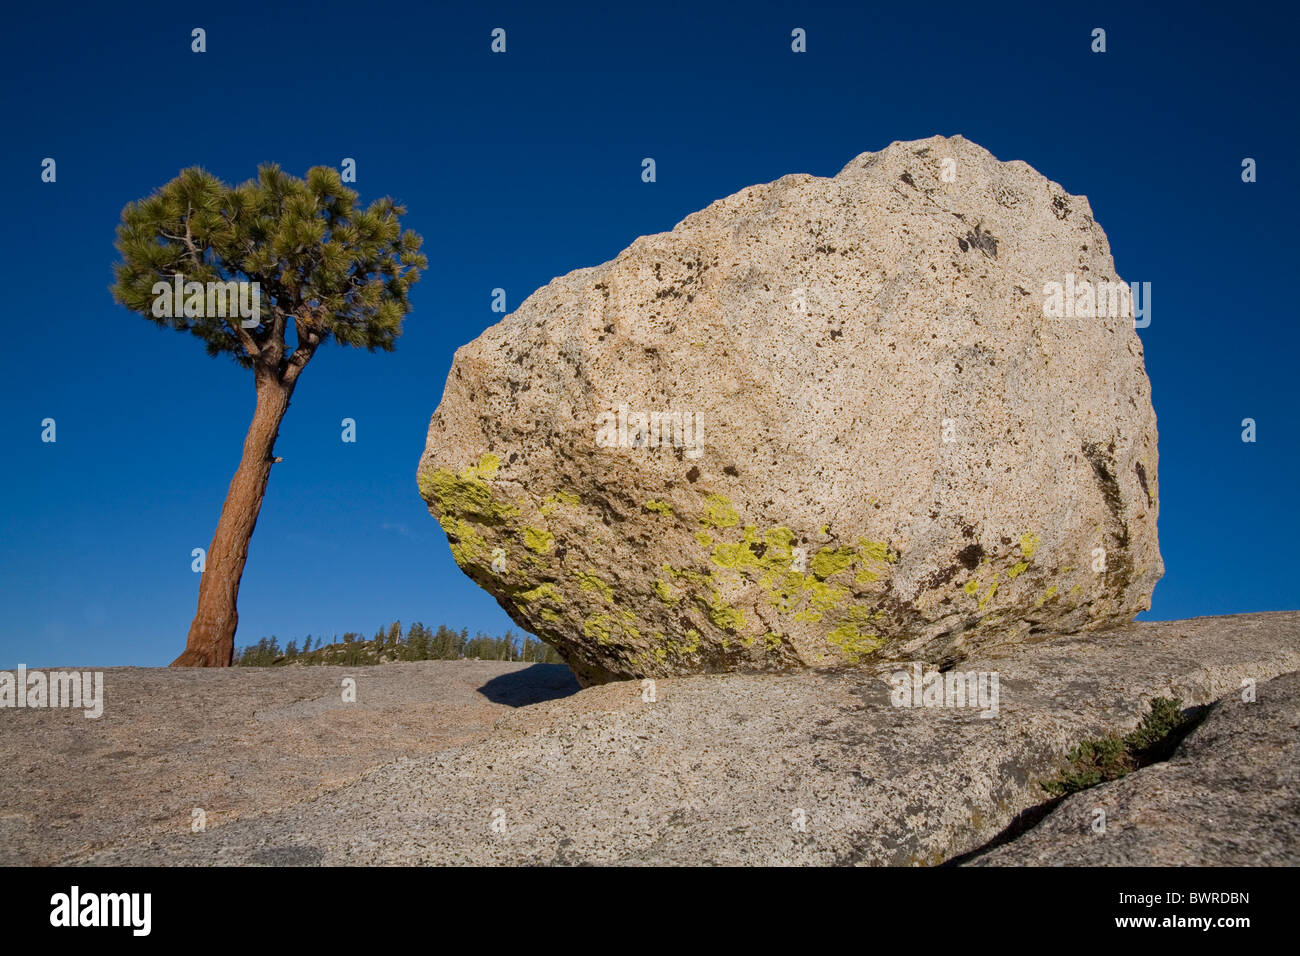 USA America United States North America Olmsted Point California Trees Tree Rock Rocks Landscape scenery S Stock Photo